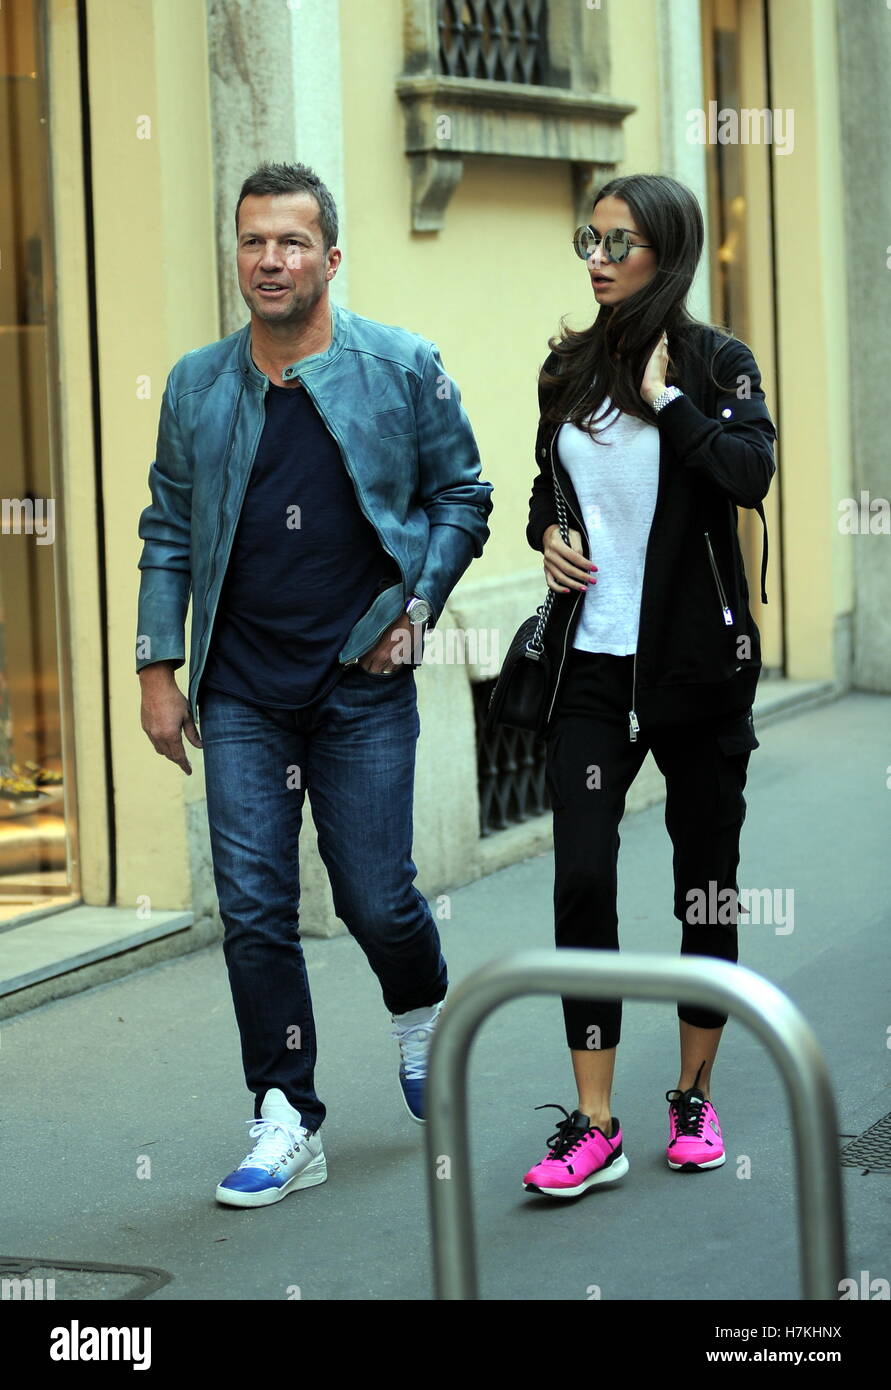 Lothar Matthaus and his wife Anastasia Klimko seen shopping and having lunch in Via Montenapoleone  Featuring: Lothar Matthaus, Anastasia Klimko, Lothar Matthäus Where: Milan, Italy When: 05 Oct 2016 Credit: IPA/WENN.com  **Only available for publication Stock Photo